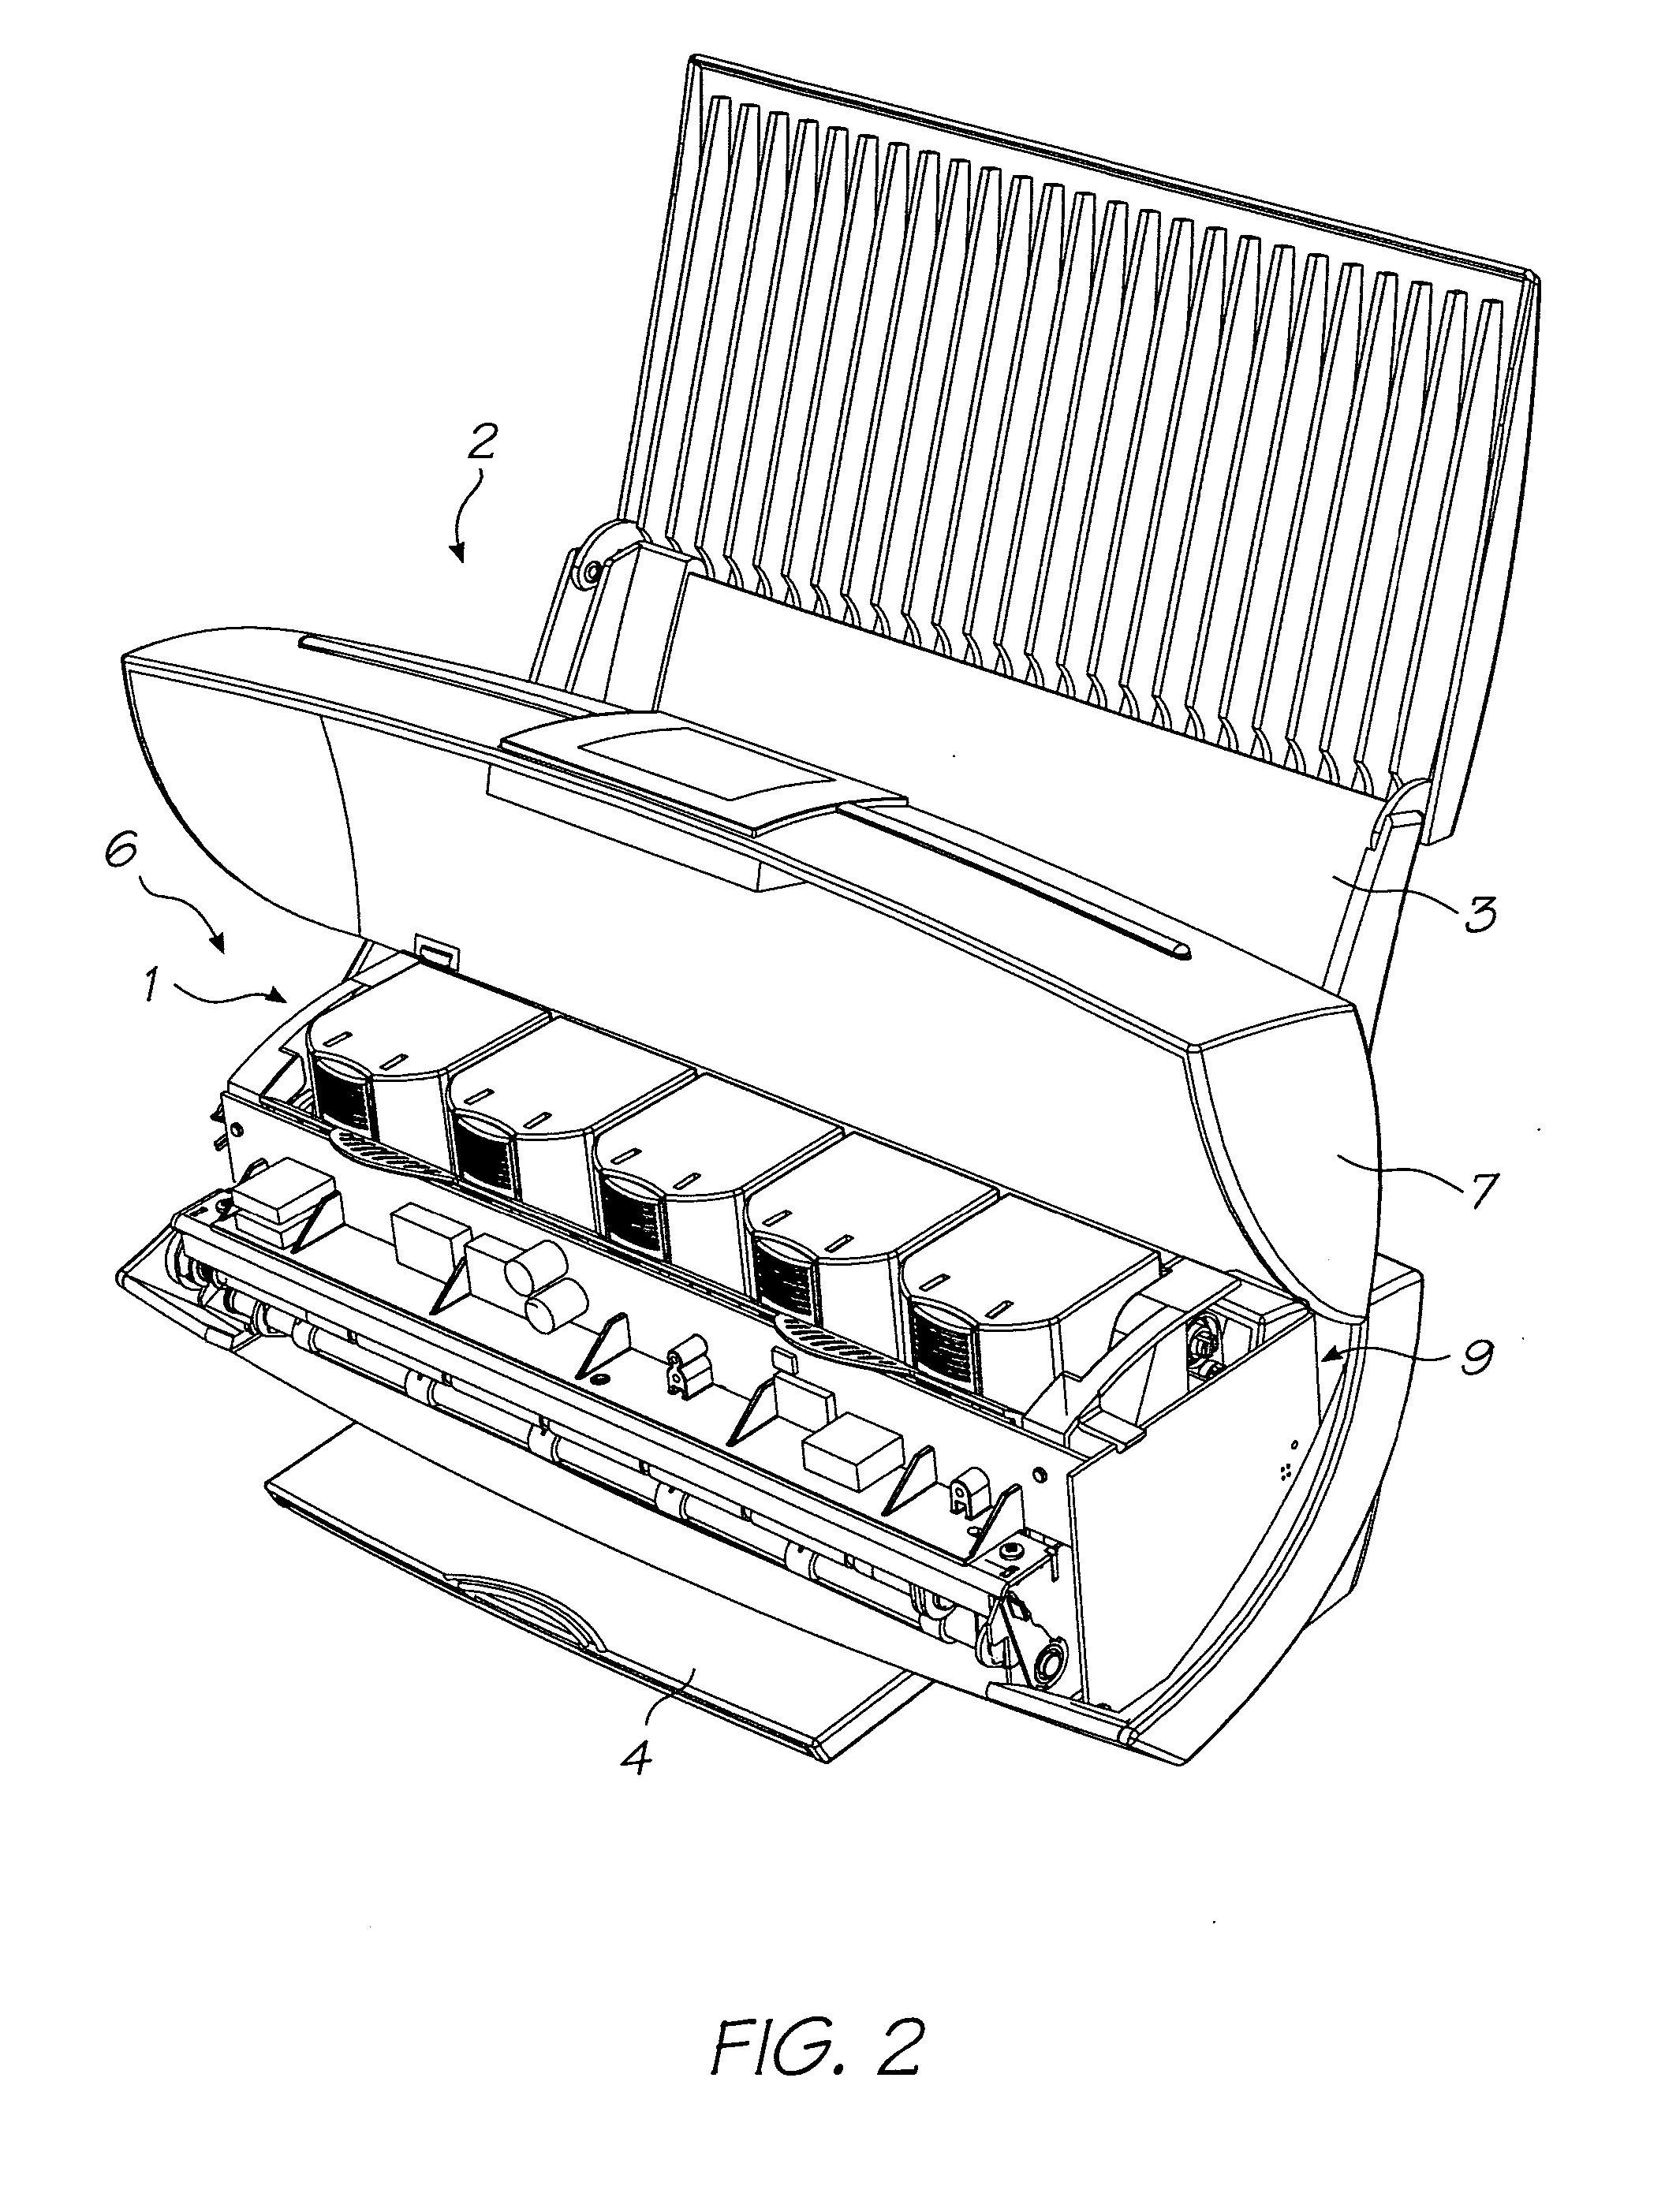 Inkjet printer with printhead cartridge and cradle that interengage via an overcentre mechanism